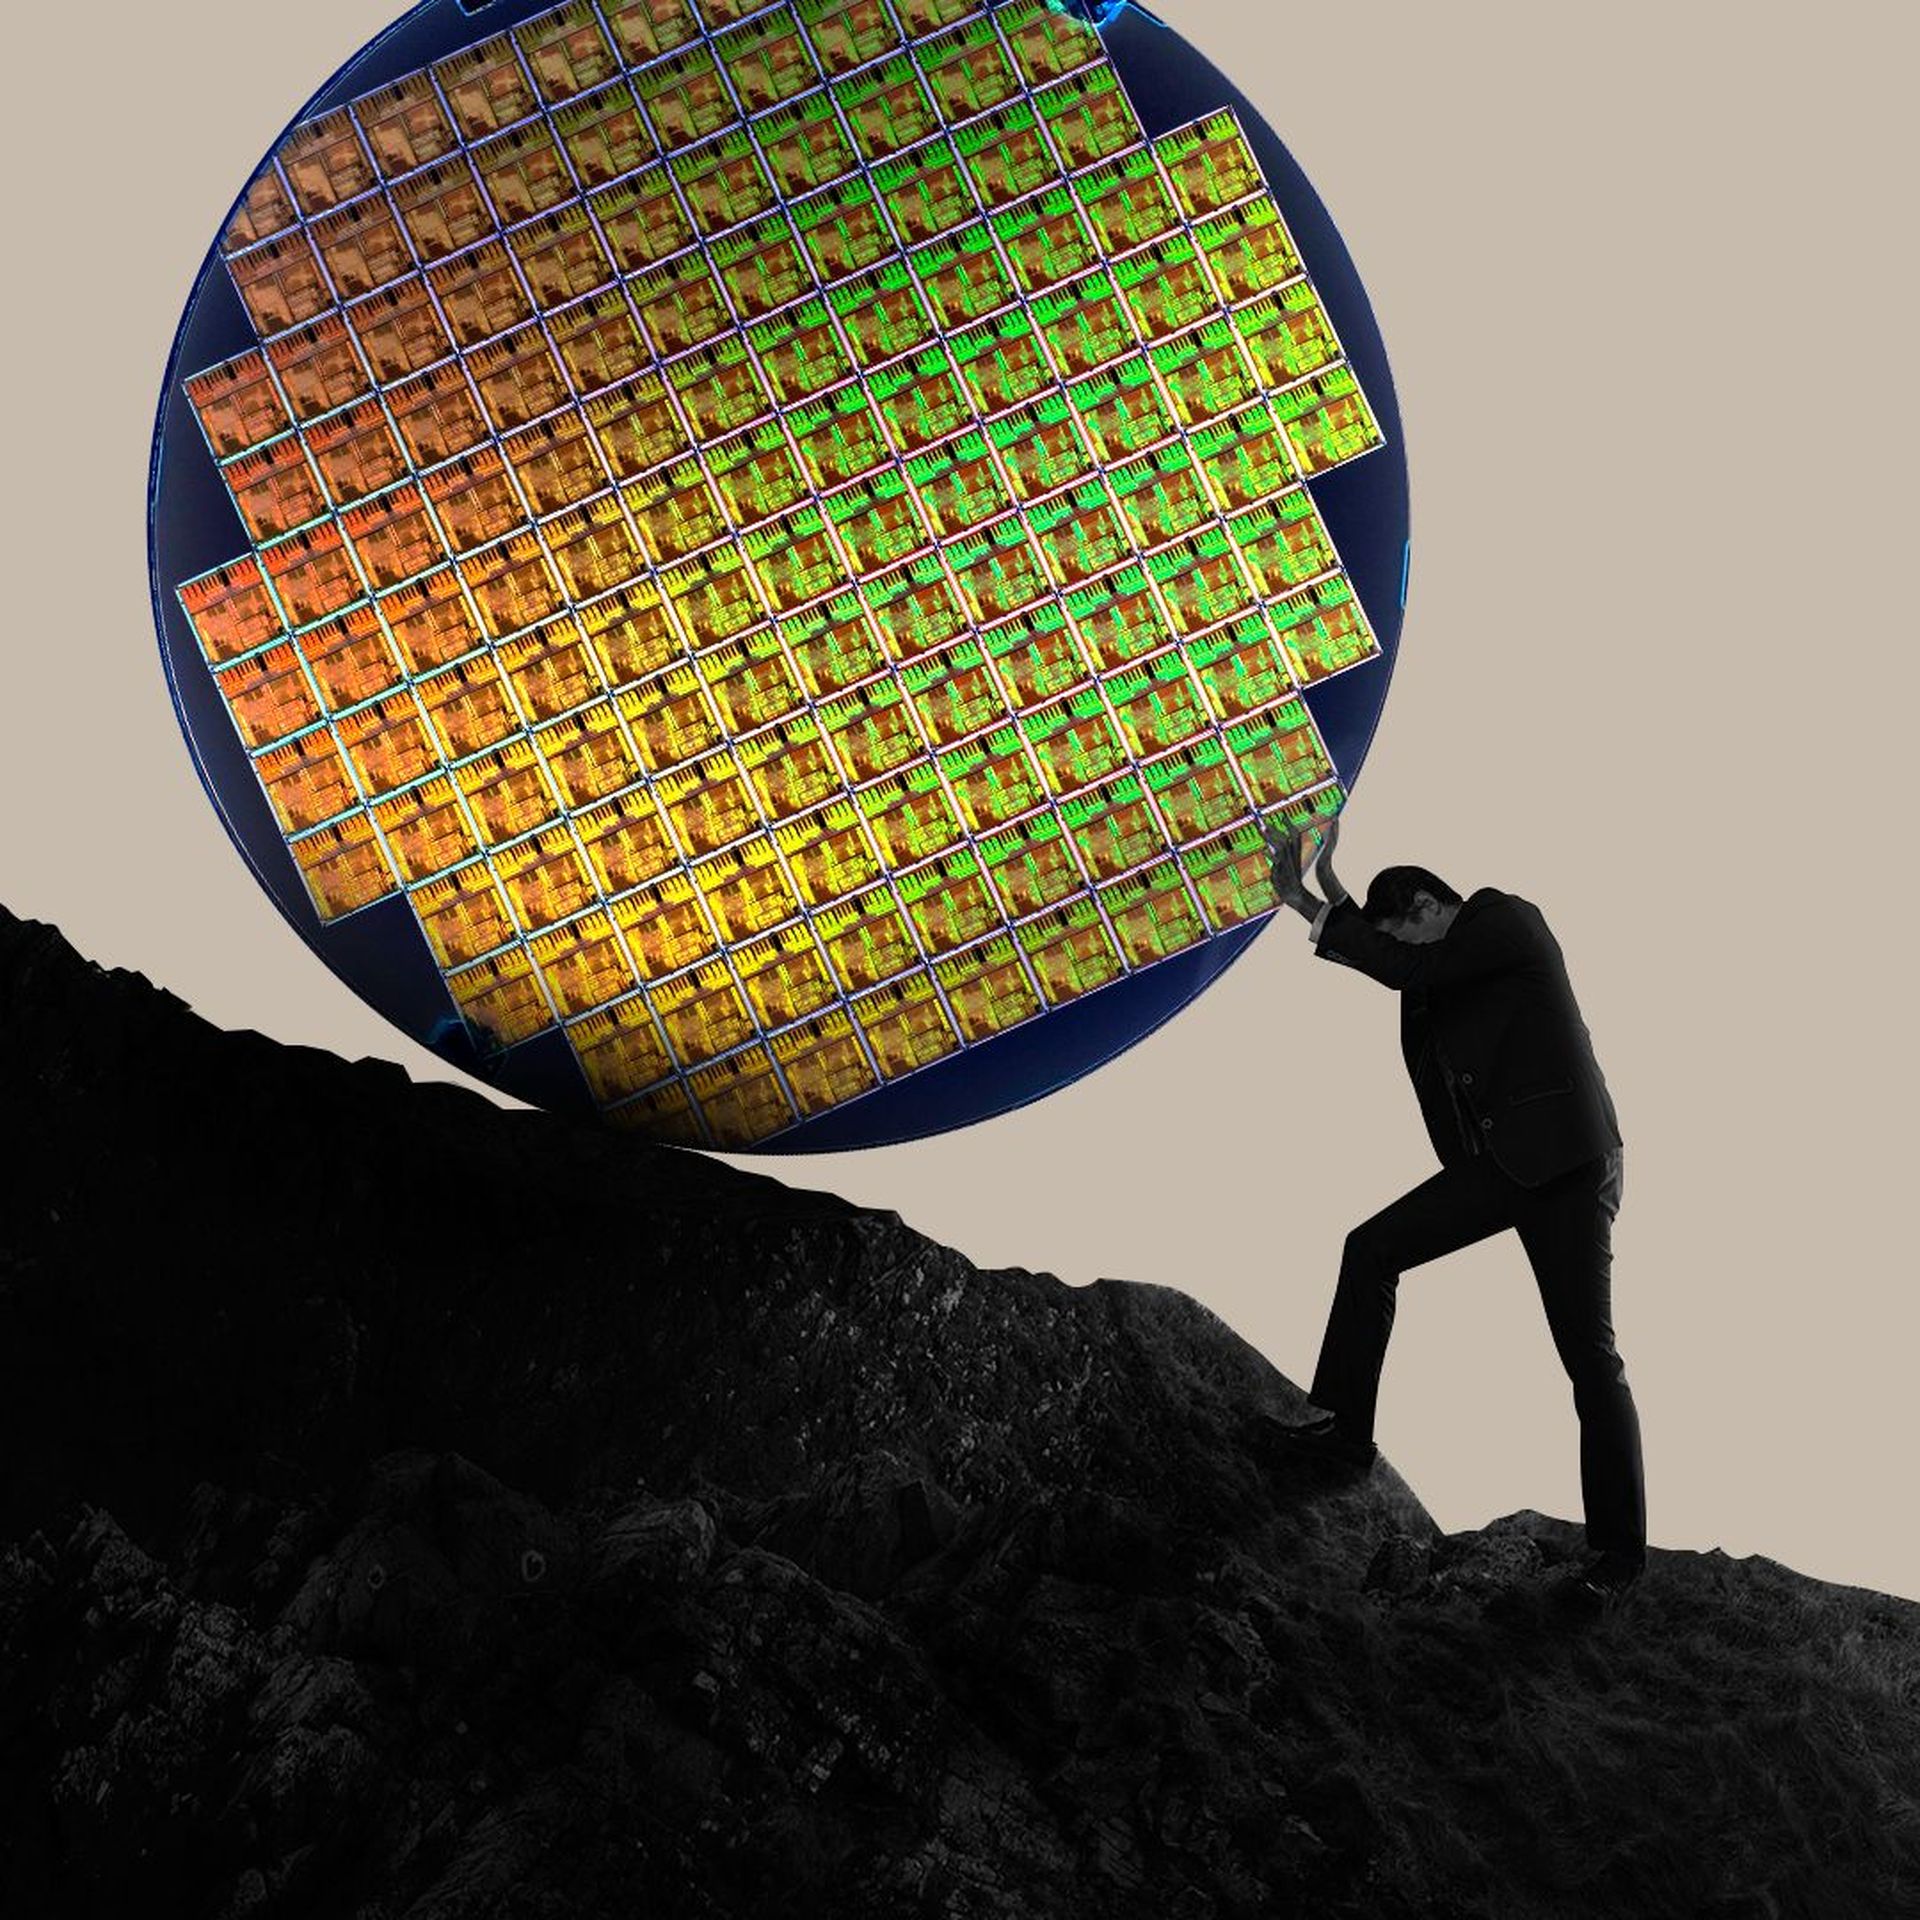 Illustration of a man struggling to push a giant semiconductor up a rocky mountain.   